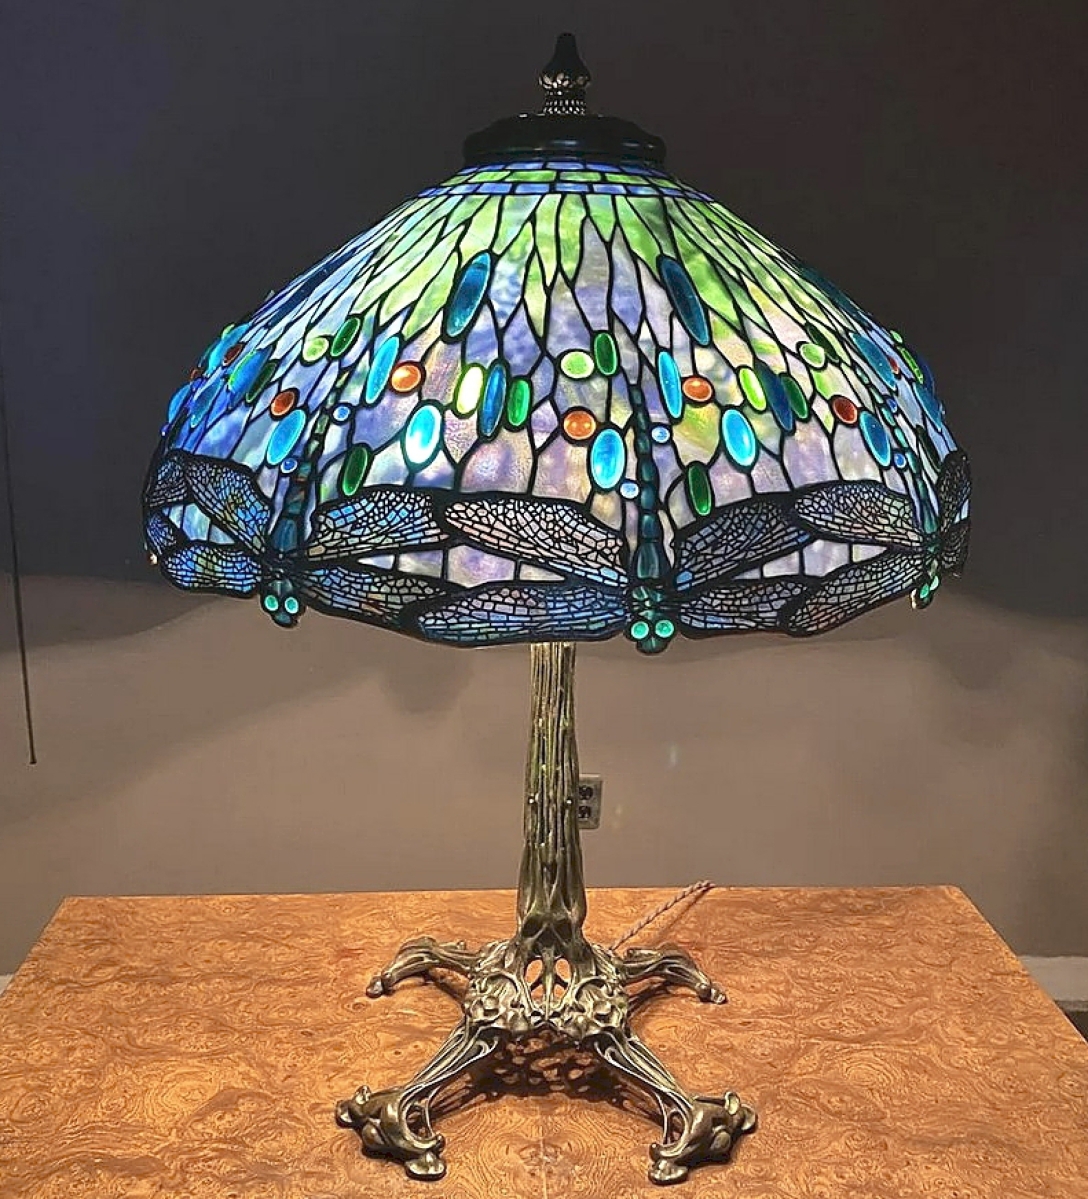 An online buyer beat out competitors to snap up this Tiffany Studios dragonfly table lamp with unusual skeleton bird pierced base. It had been sourced from a local estate, stood 30 inches tall was marked 1507-20 on the shade and 442 on the base. Estimated at $200/300,000, it brought $250,000, the top price realized in three days of sales.